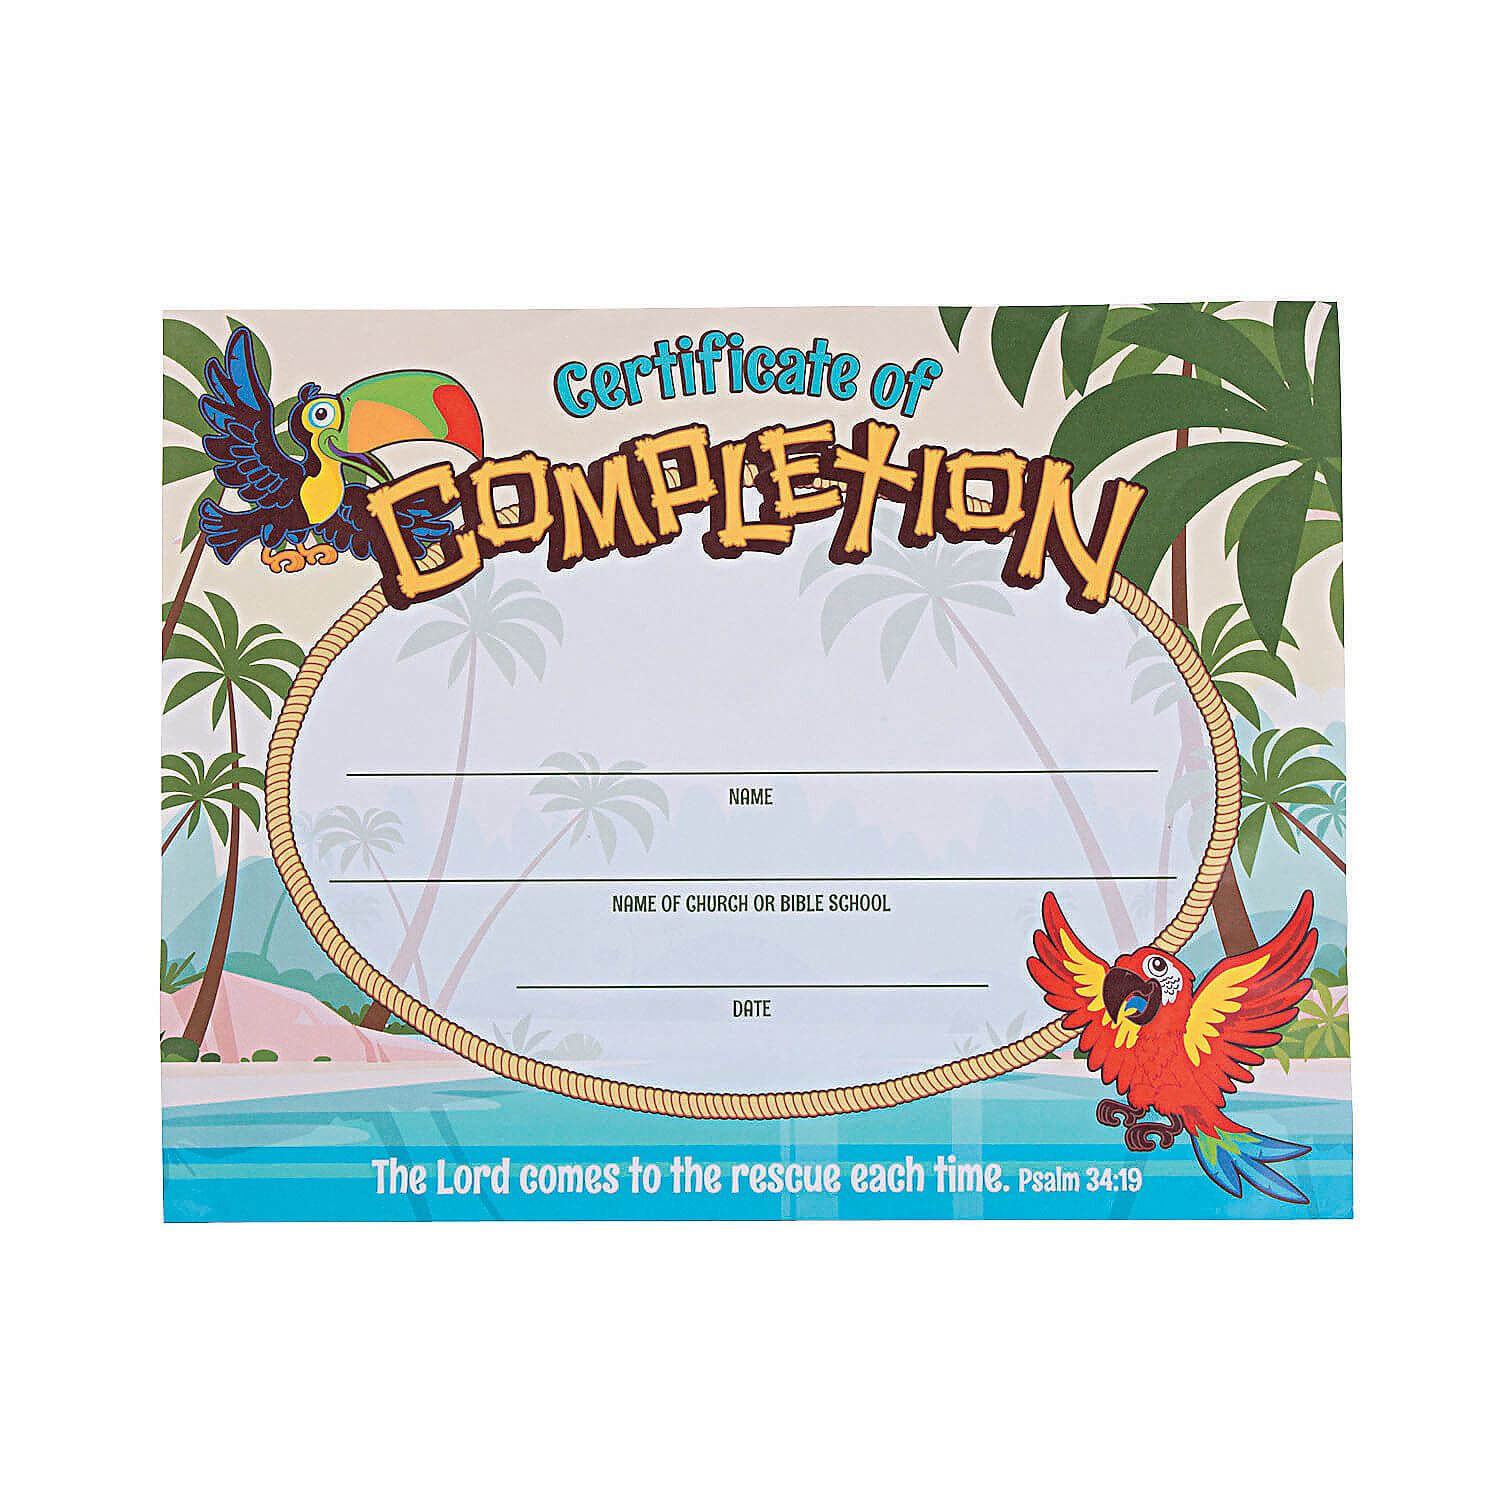 Island Vbs Certificates Of Completion | Stuff I Designed For Inside Free Vbs Certificate Templates